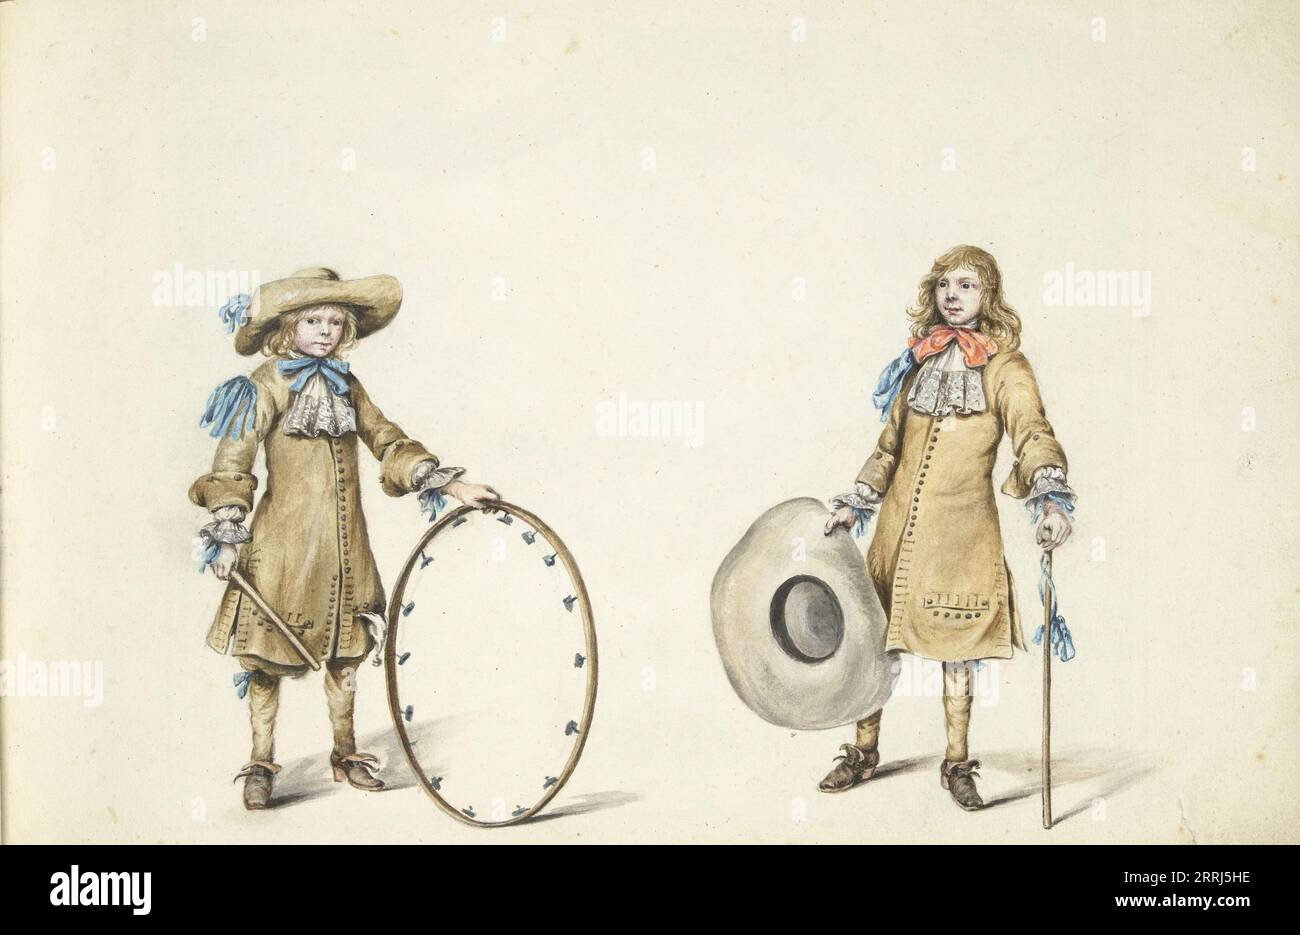 Gerrit and Cornelis Schellinger as children, c.1675-c.1685. Gerrit and Cornelis Schellinger, nephews of Gesina ter Borch. Cornelis holds a hoop with small metal cymbals or bells that made a sound when rolling. The oldest boy, Gerrit, wears a hat with a side brim, possibly also part of a game. Stock Photo